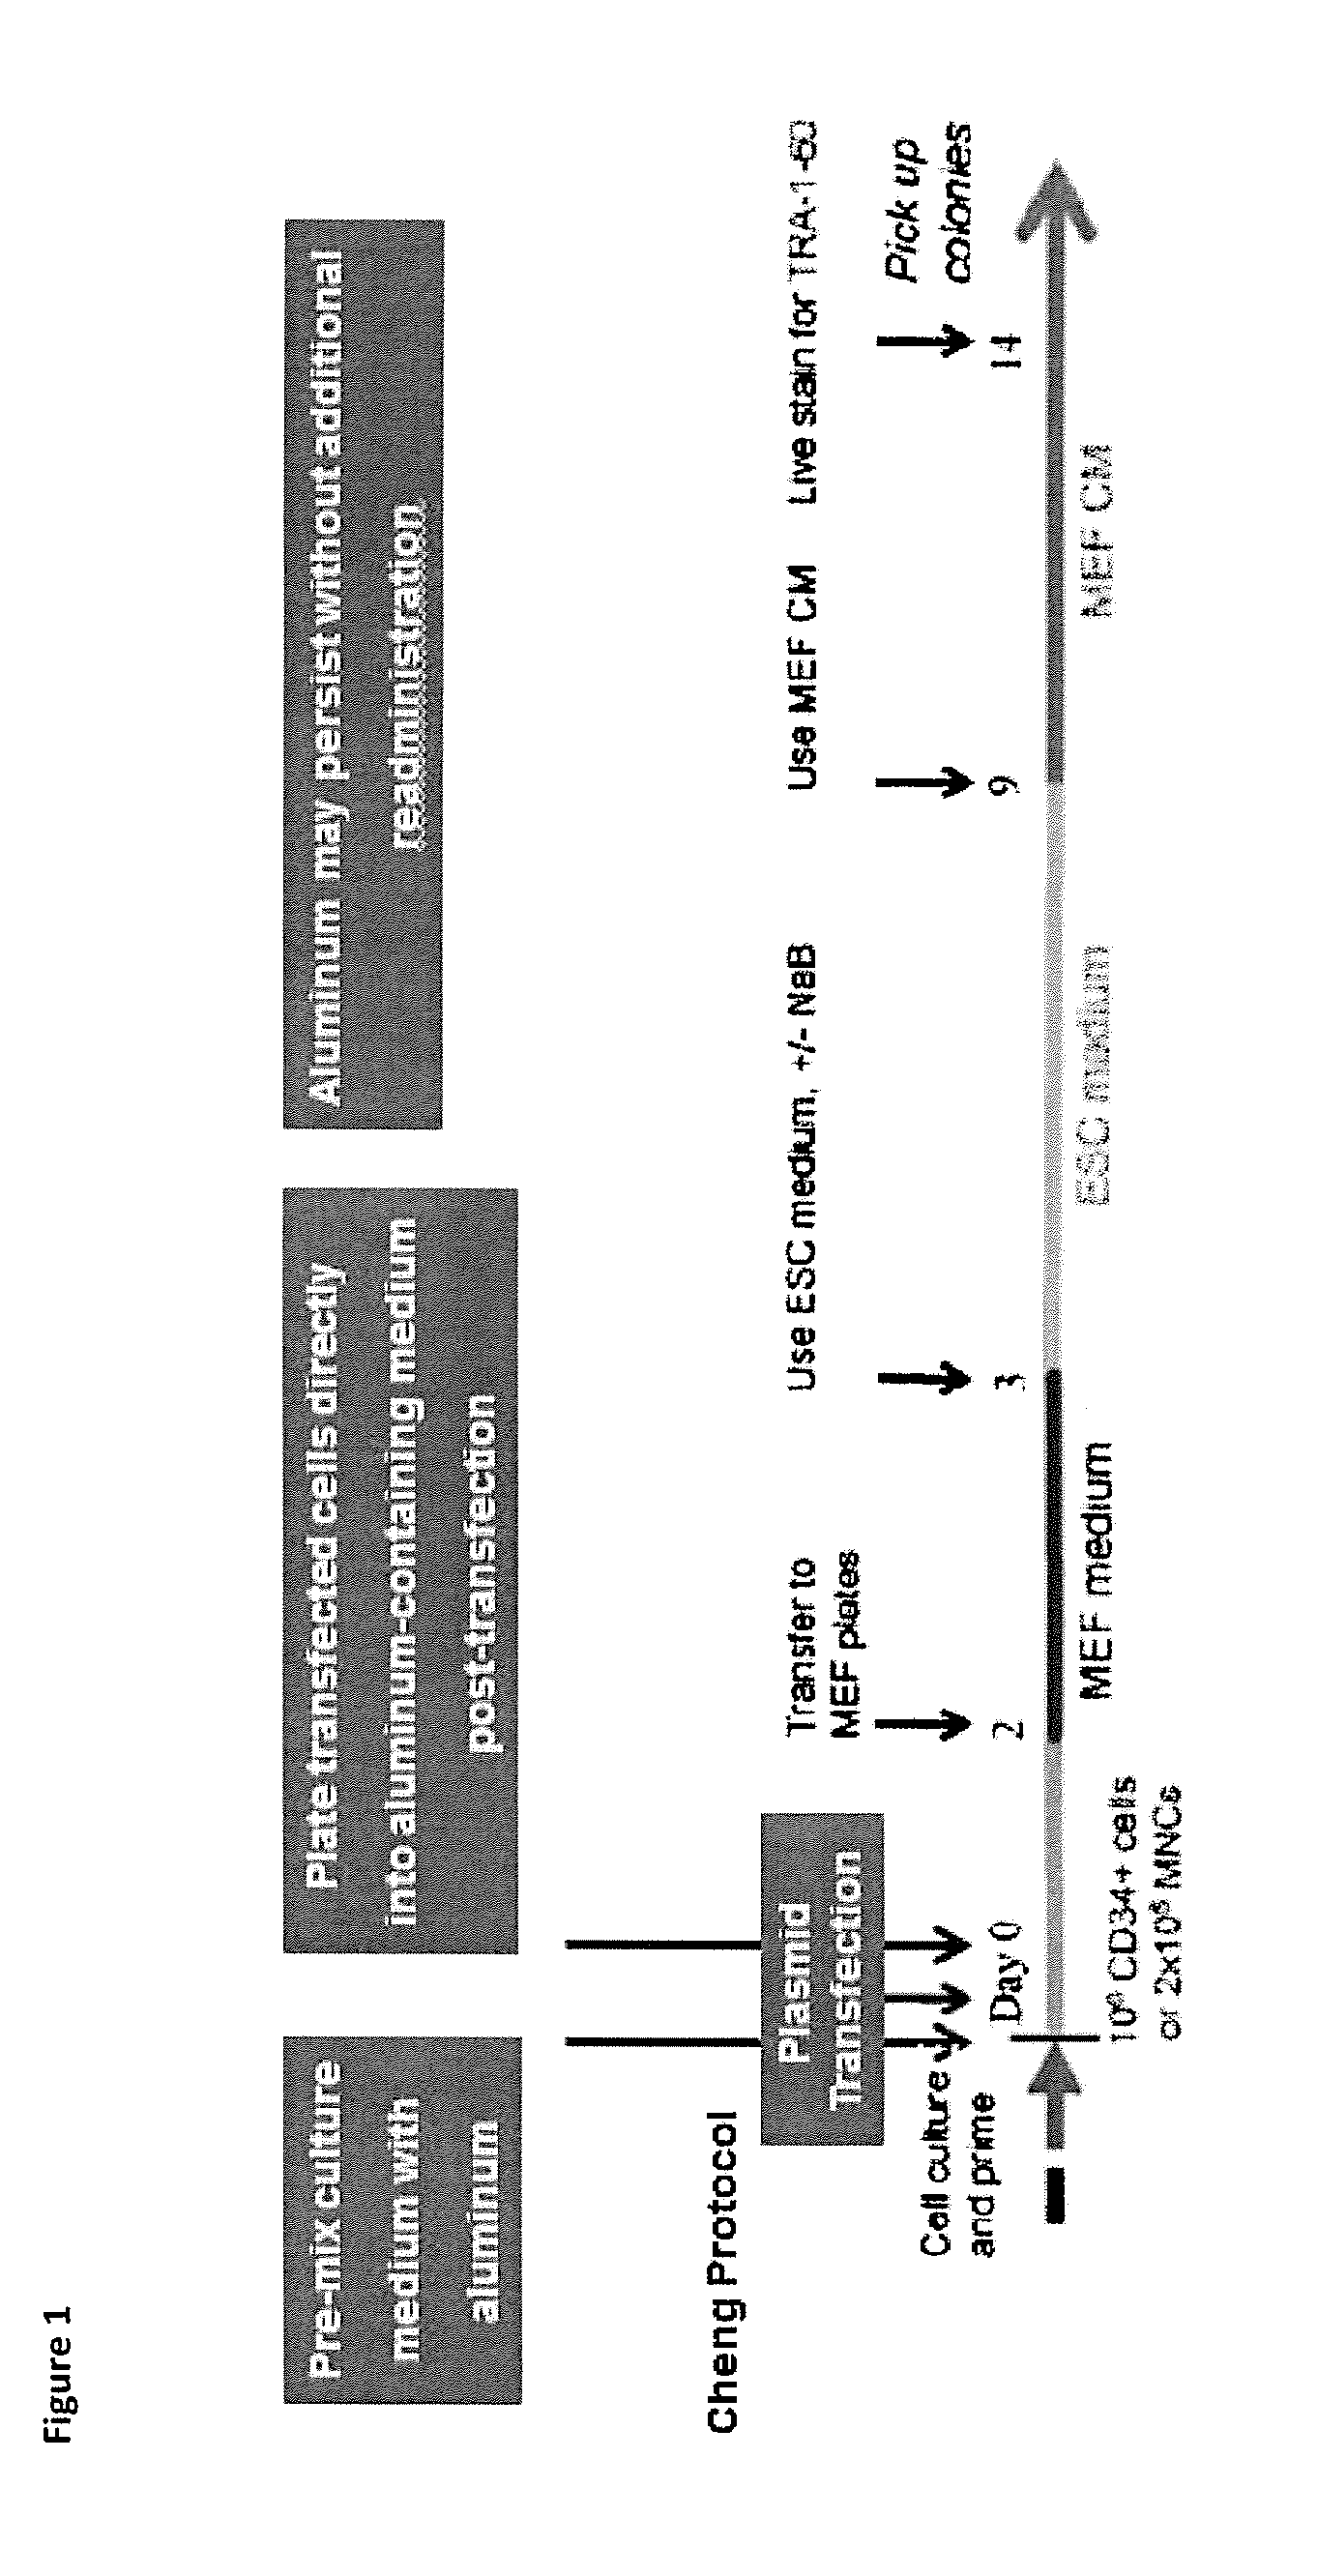 Methods for nuclear reprogramming of cells